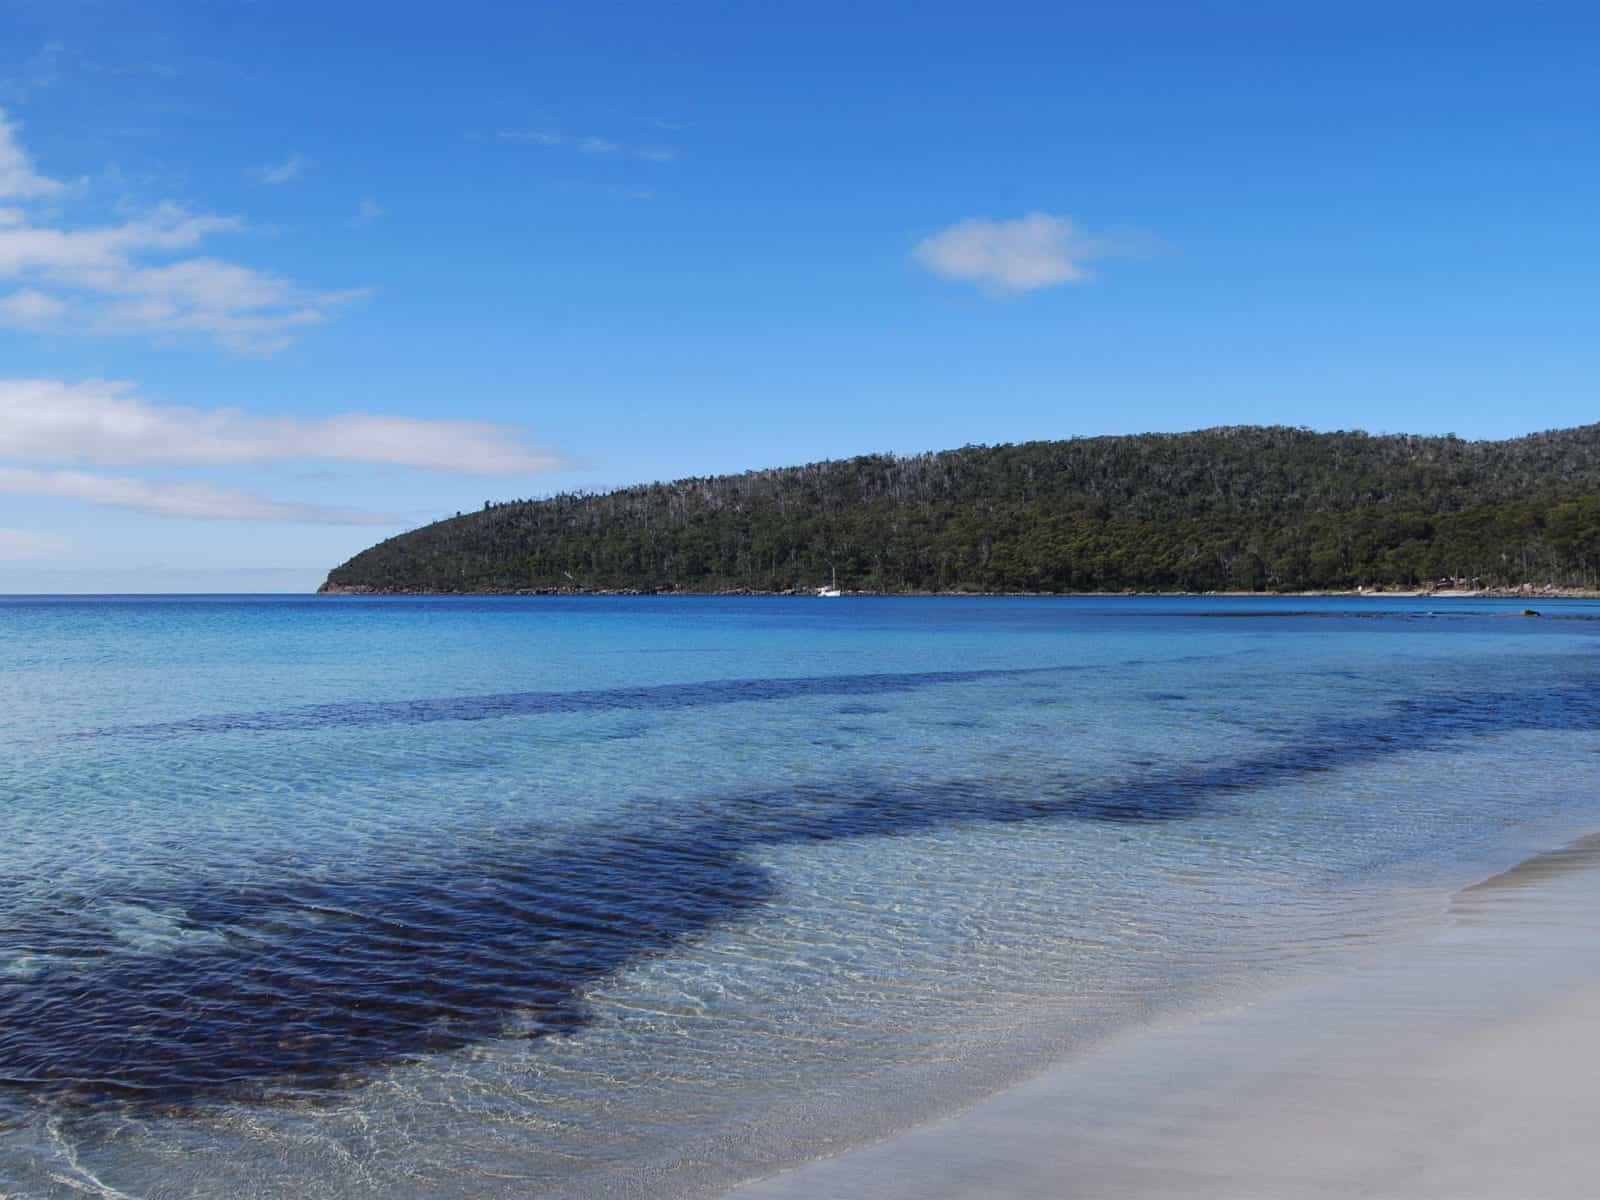 Crystal clear waters of Fortescue Bay